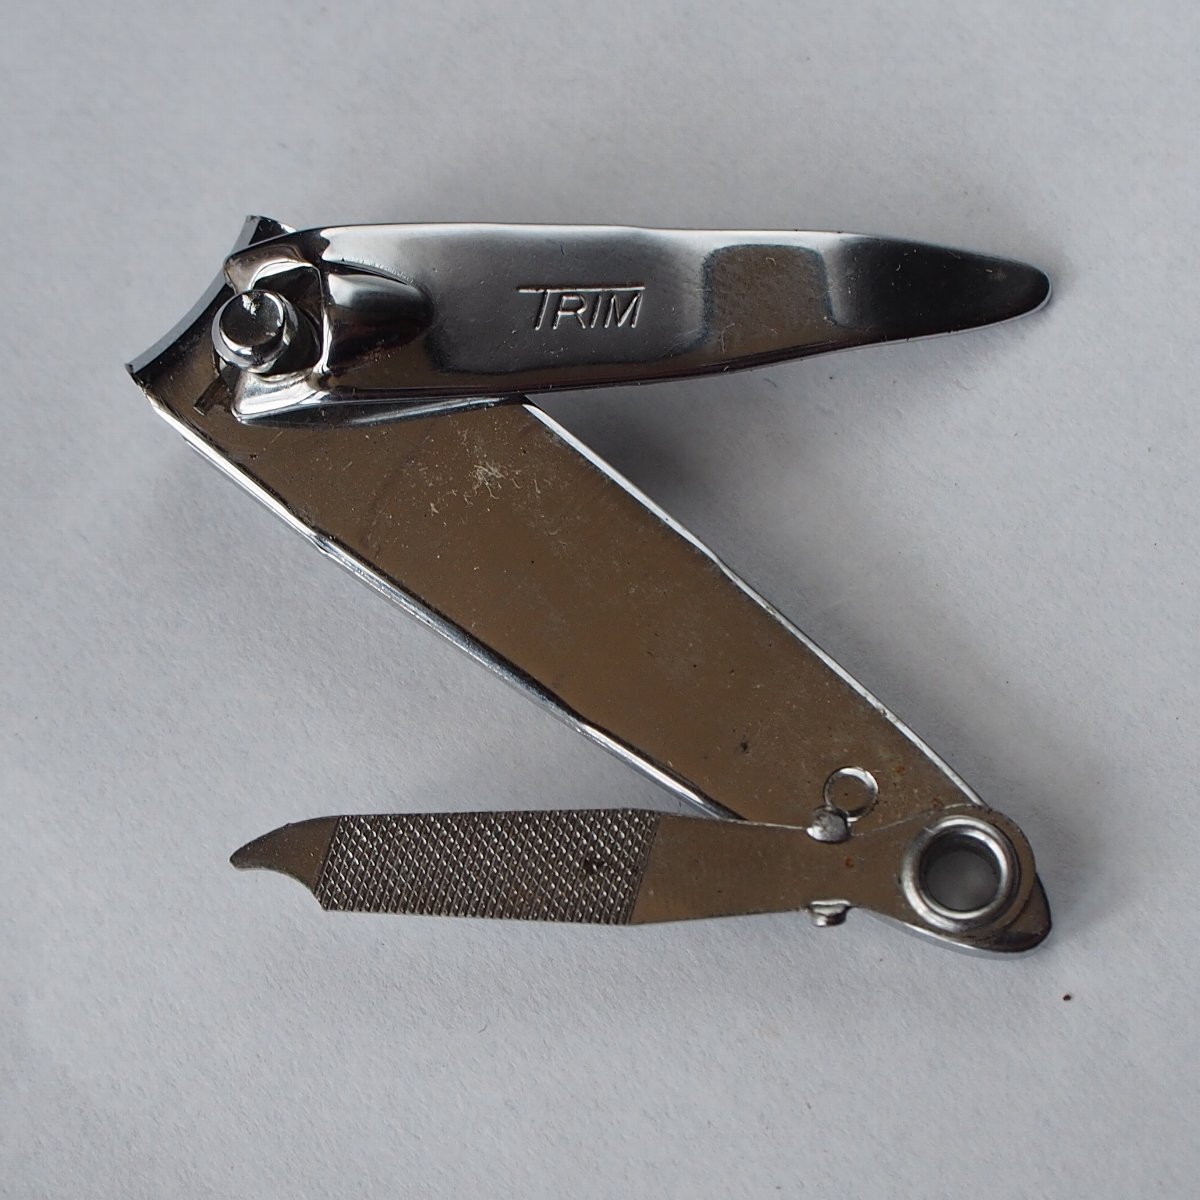 Partner small size nail clippers 3.5.